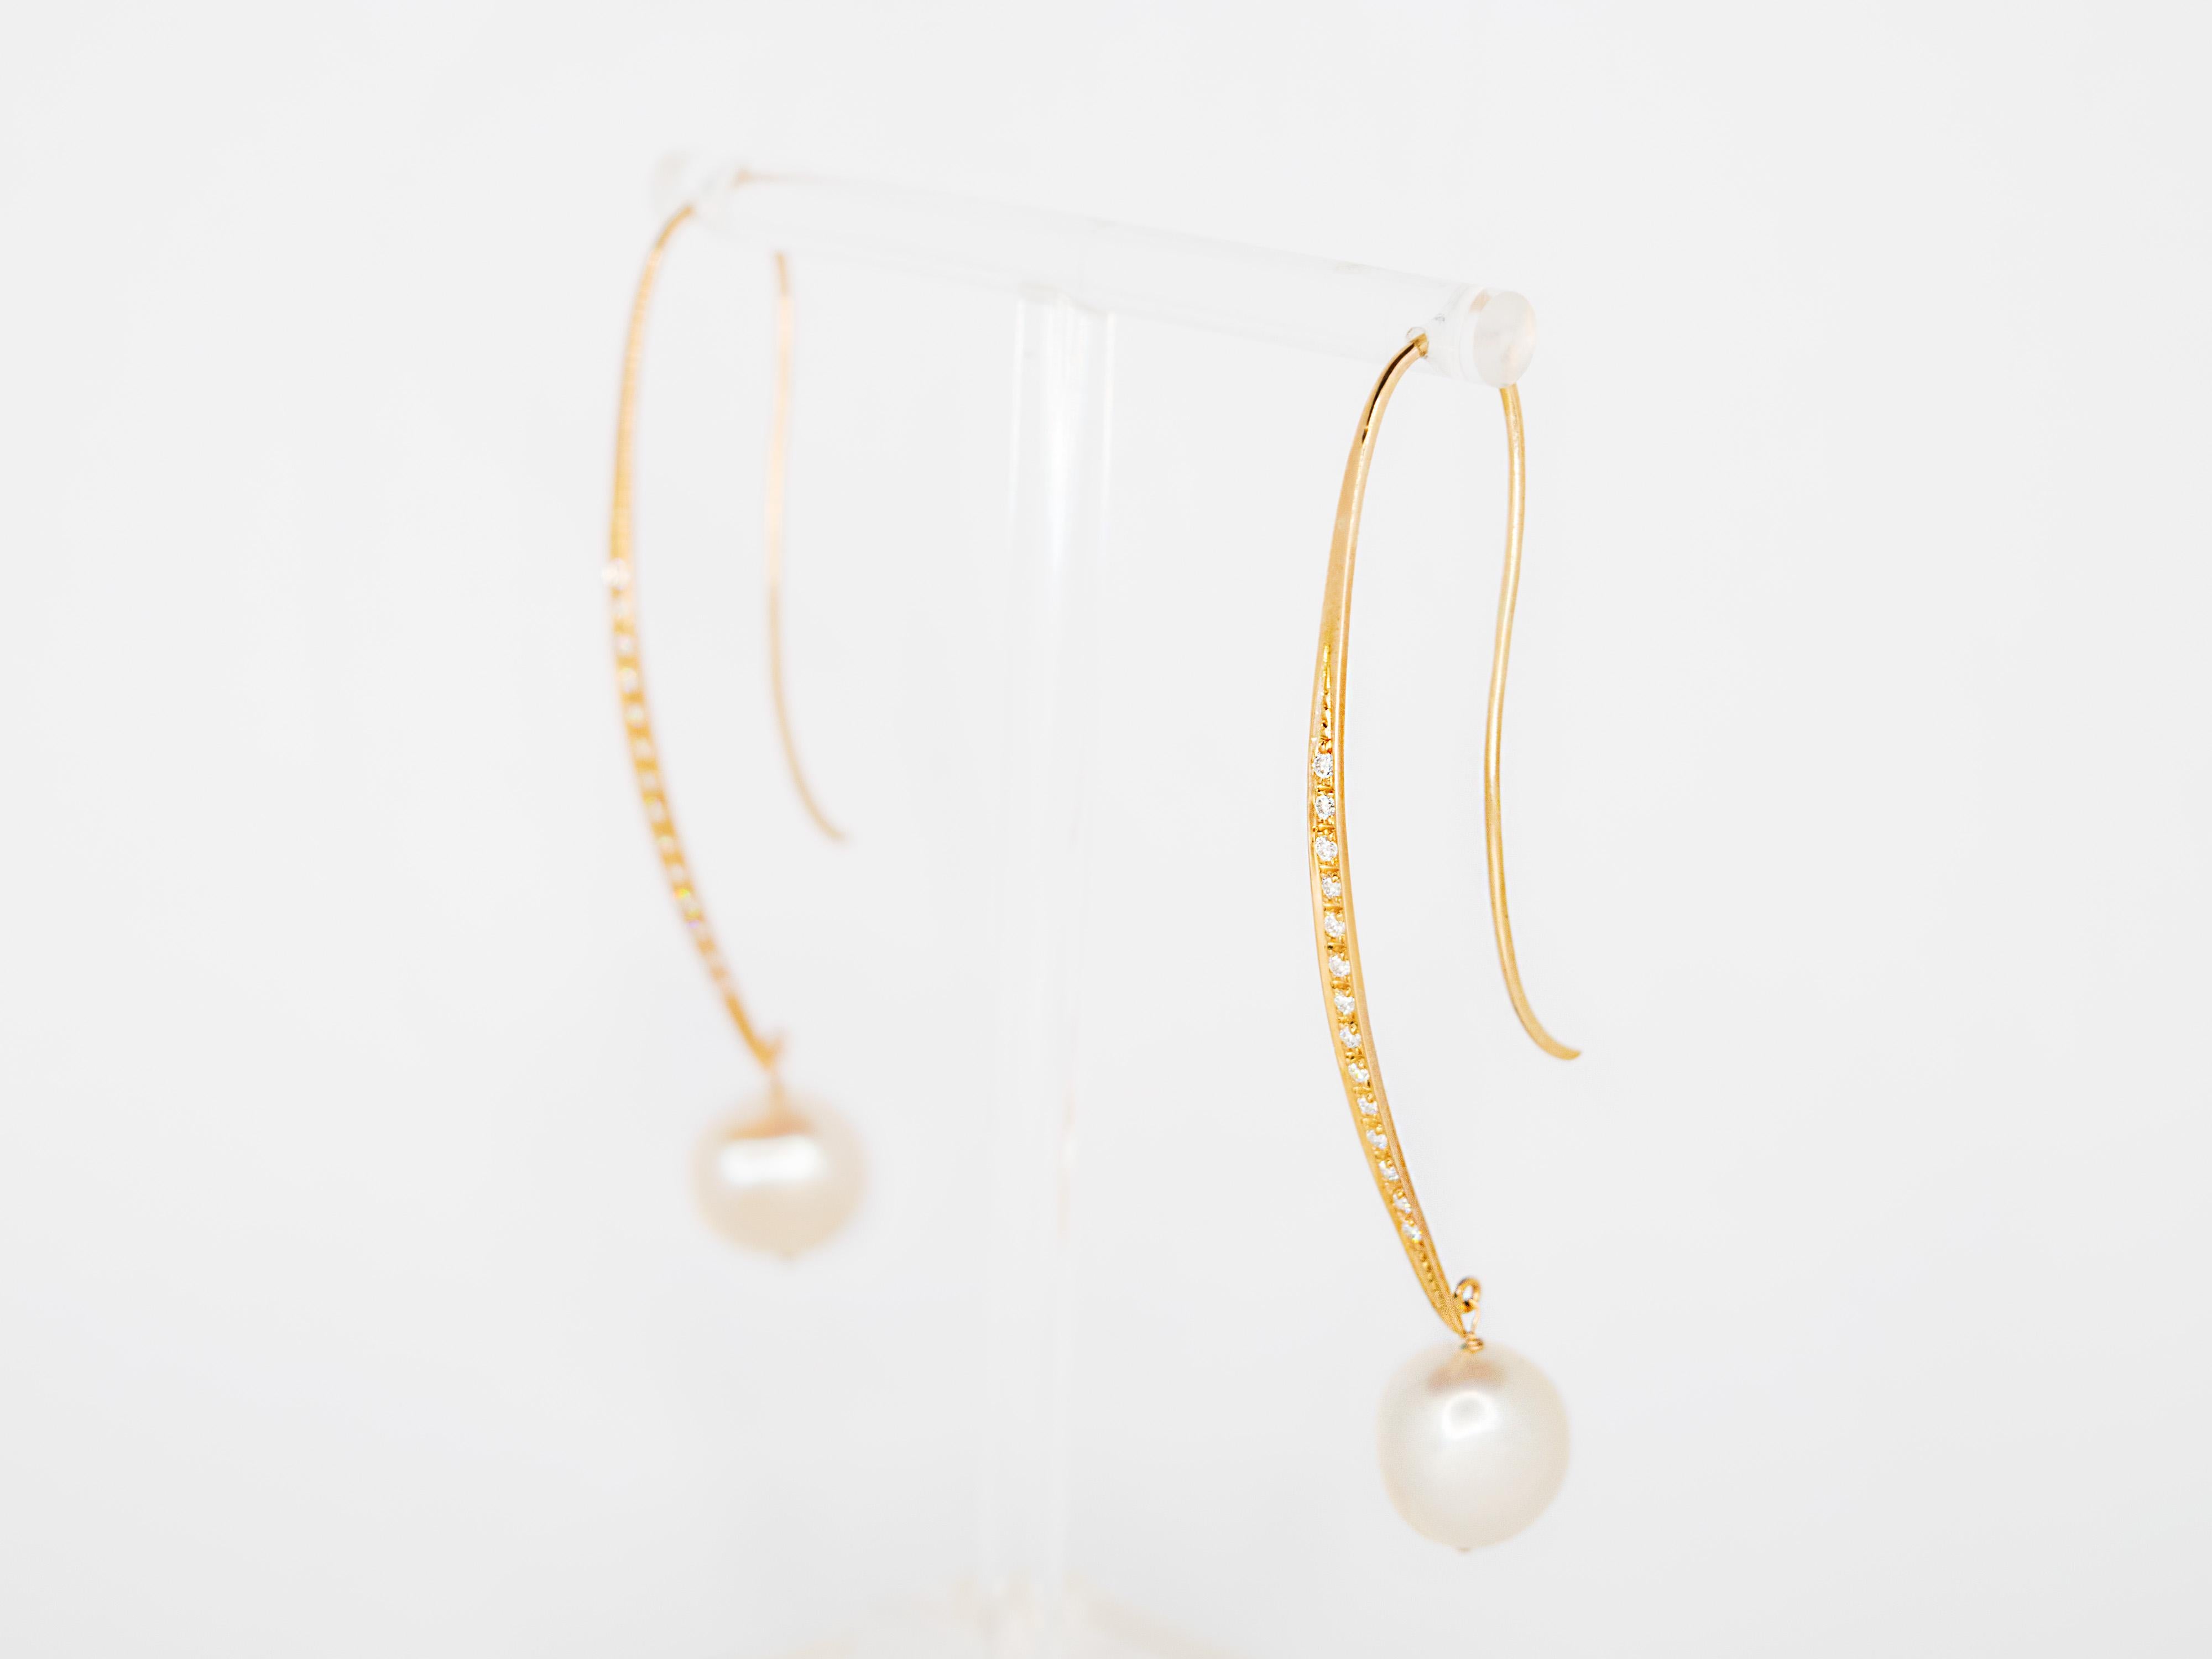 An elegant pair of 18kt rose gold earrings embellished with brilliant-cut Diamonds and irregularly shaped pearls
These earrings have a total weight of 7.1 grams and a total length of 6.8.
The beads are 1.2 cm in diameter.
They are handmade in